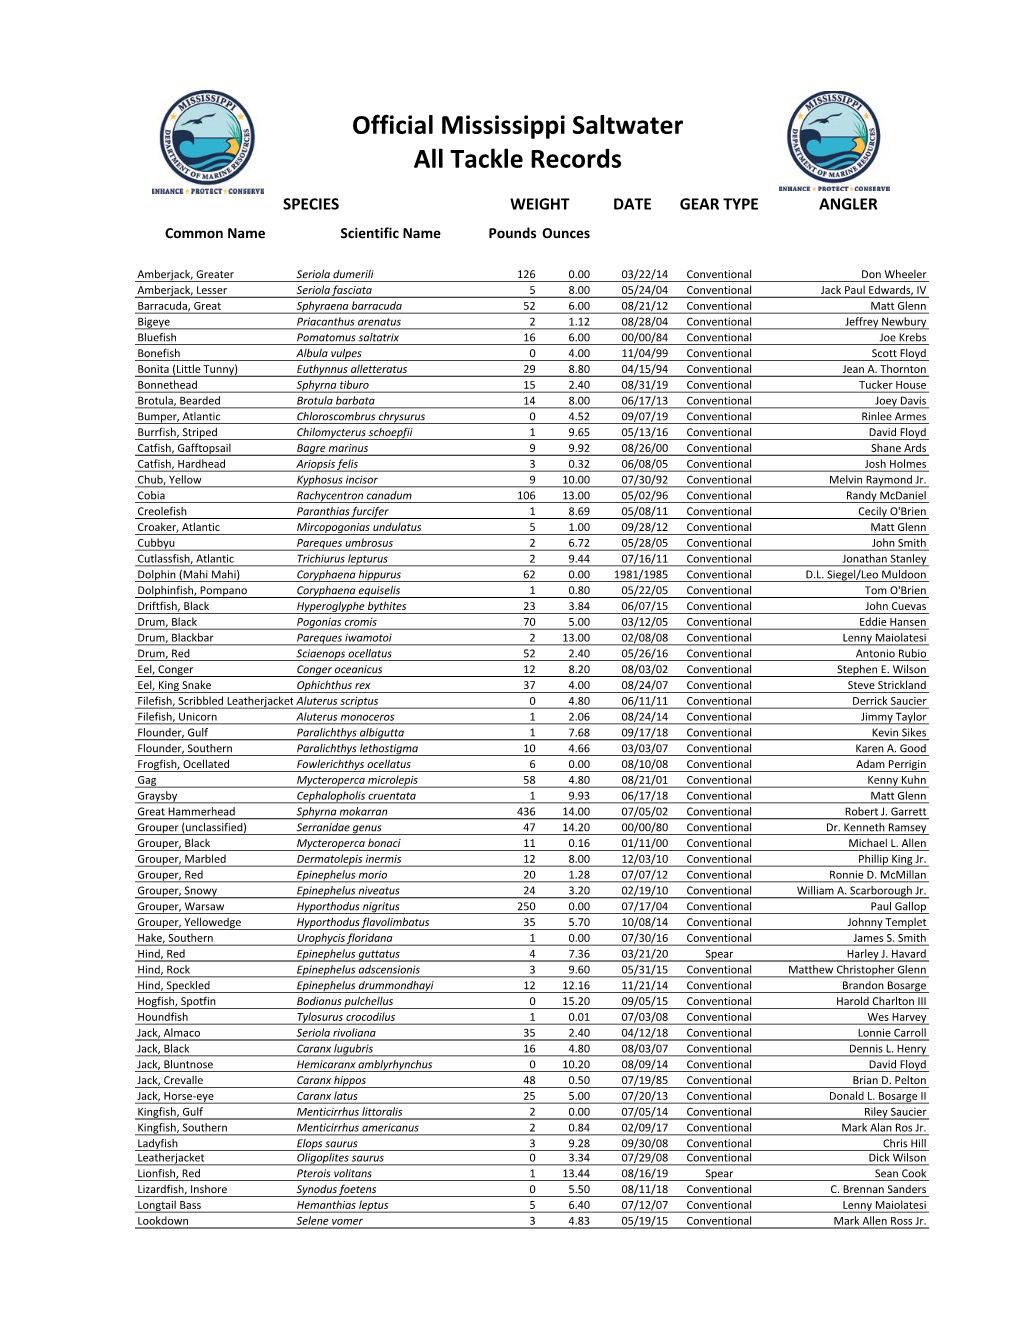 Official Mississippi Saltwater All Tackle Records